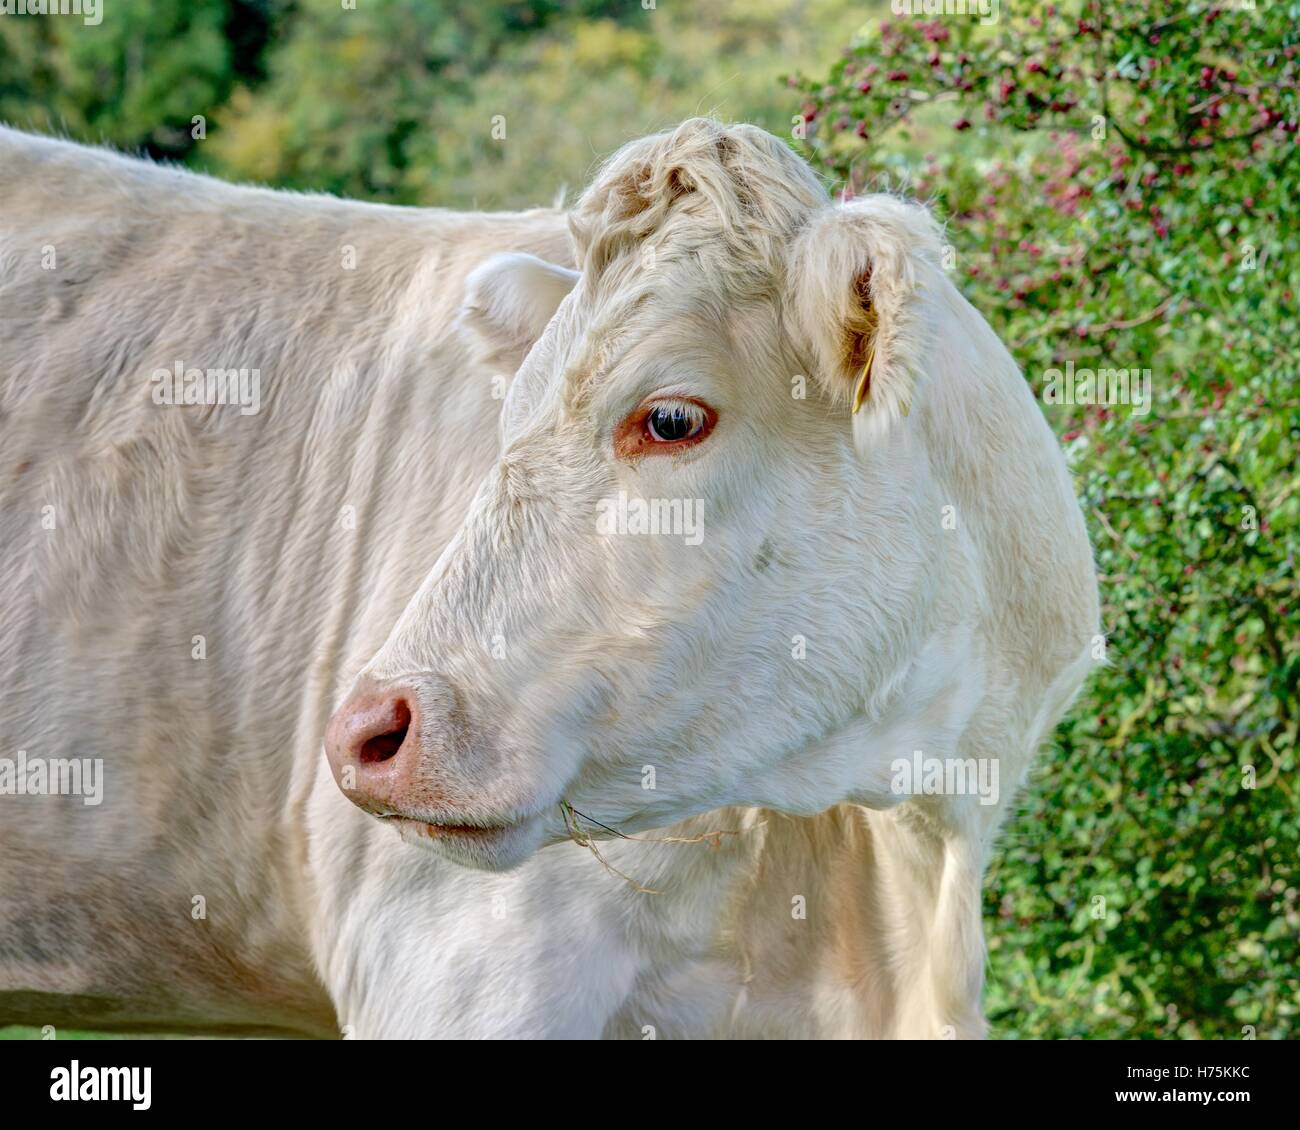 A sharply rendered head and shoulder candid portrait of a white cow against a natural blurred background of greenery. Stock Photo